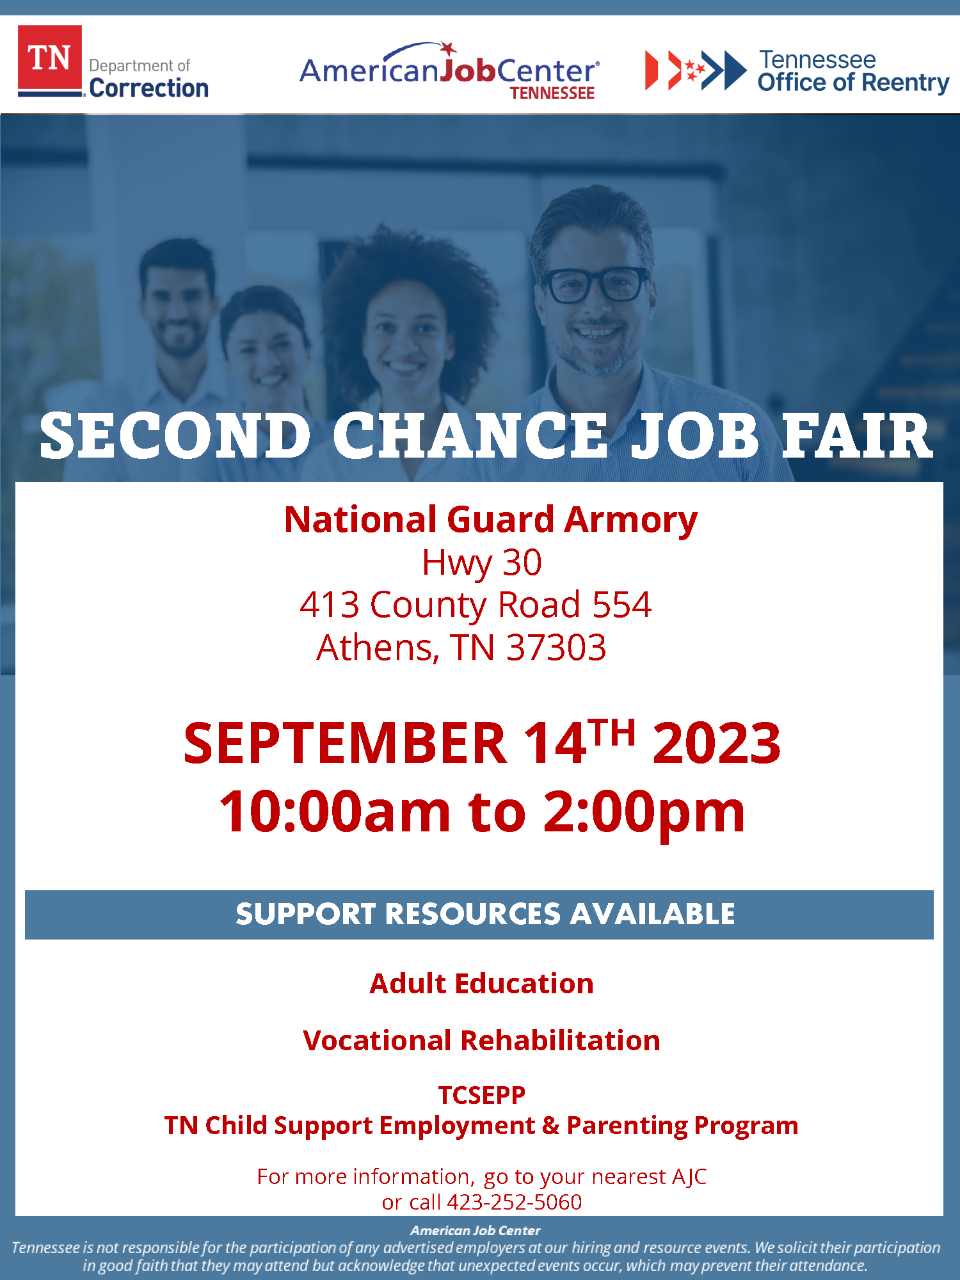 Second Chance Job Fair in Athens, TN, 9/14/2023